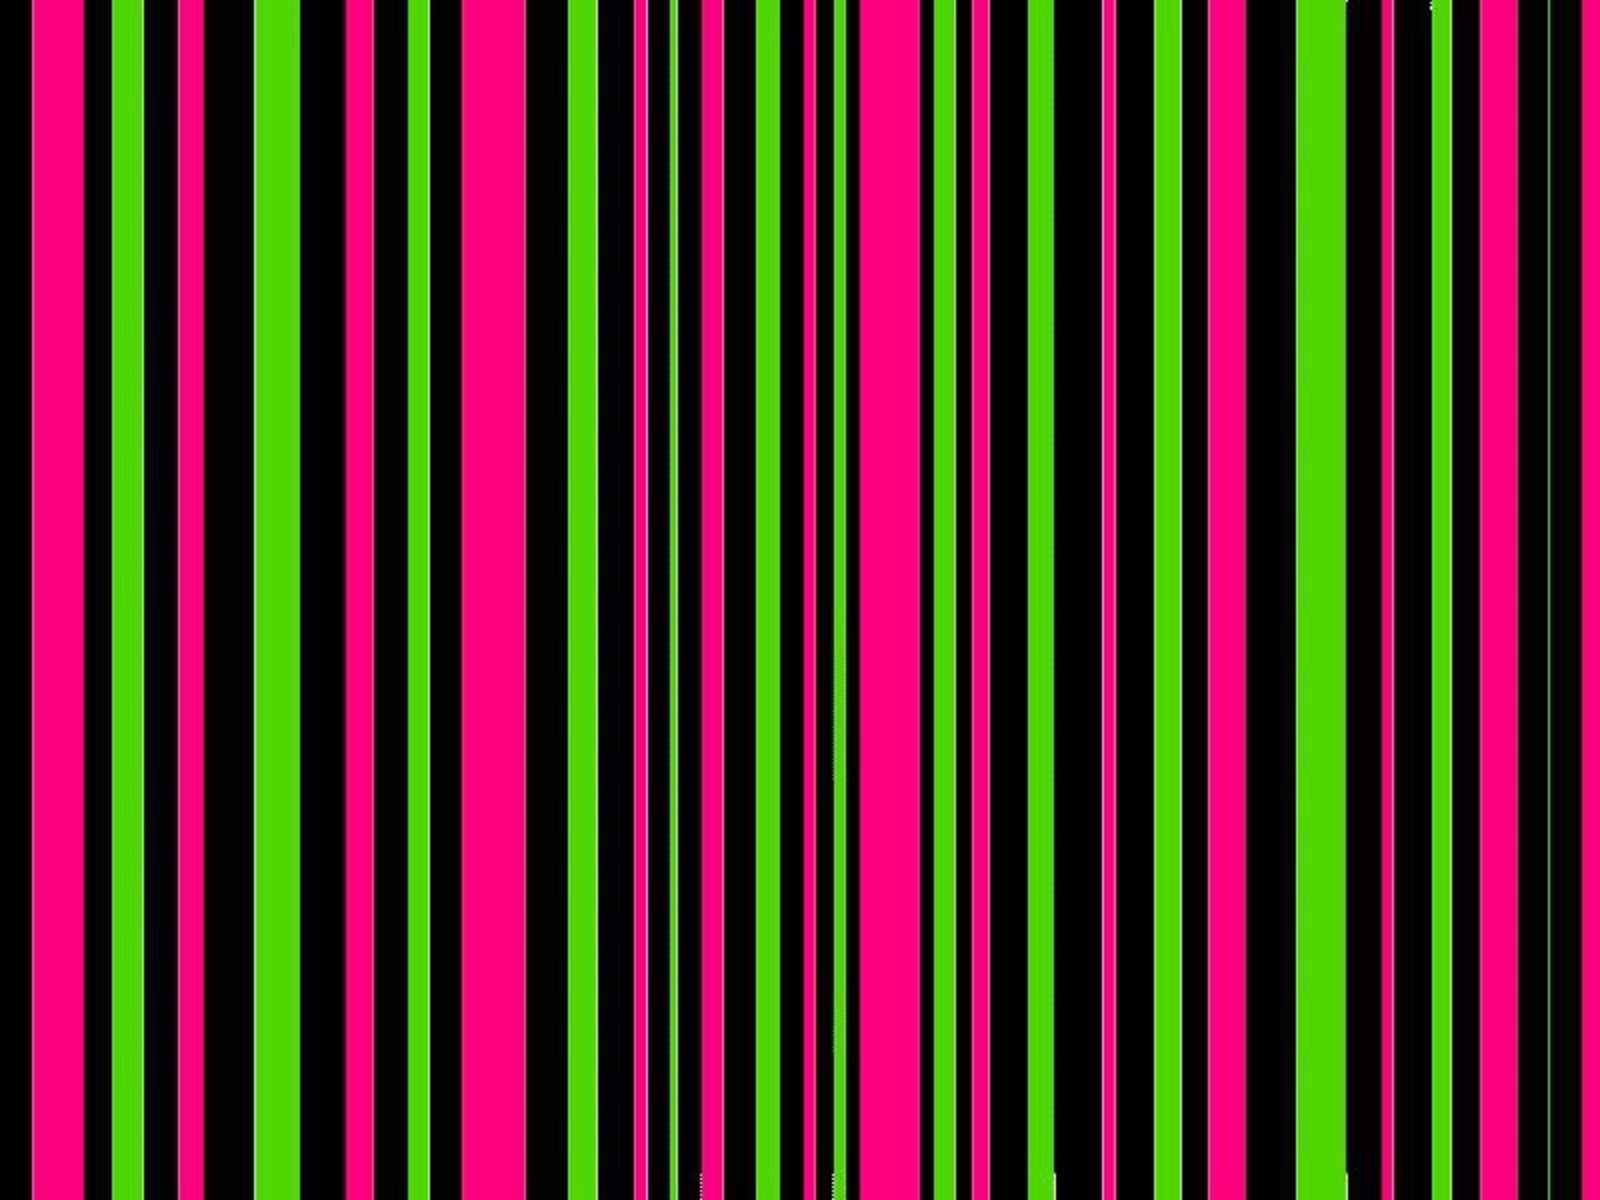 Neon Colors Rock Image Stripes HD Wallpaper And